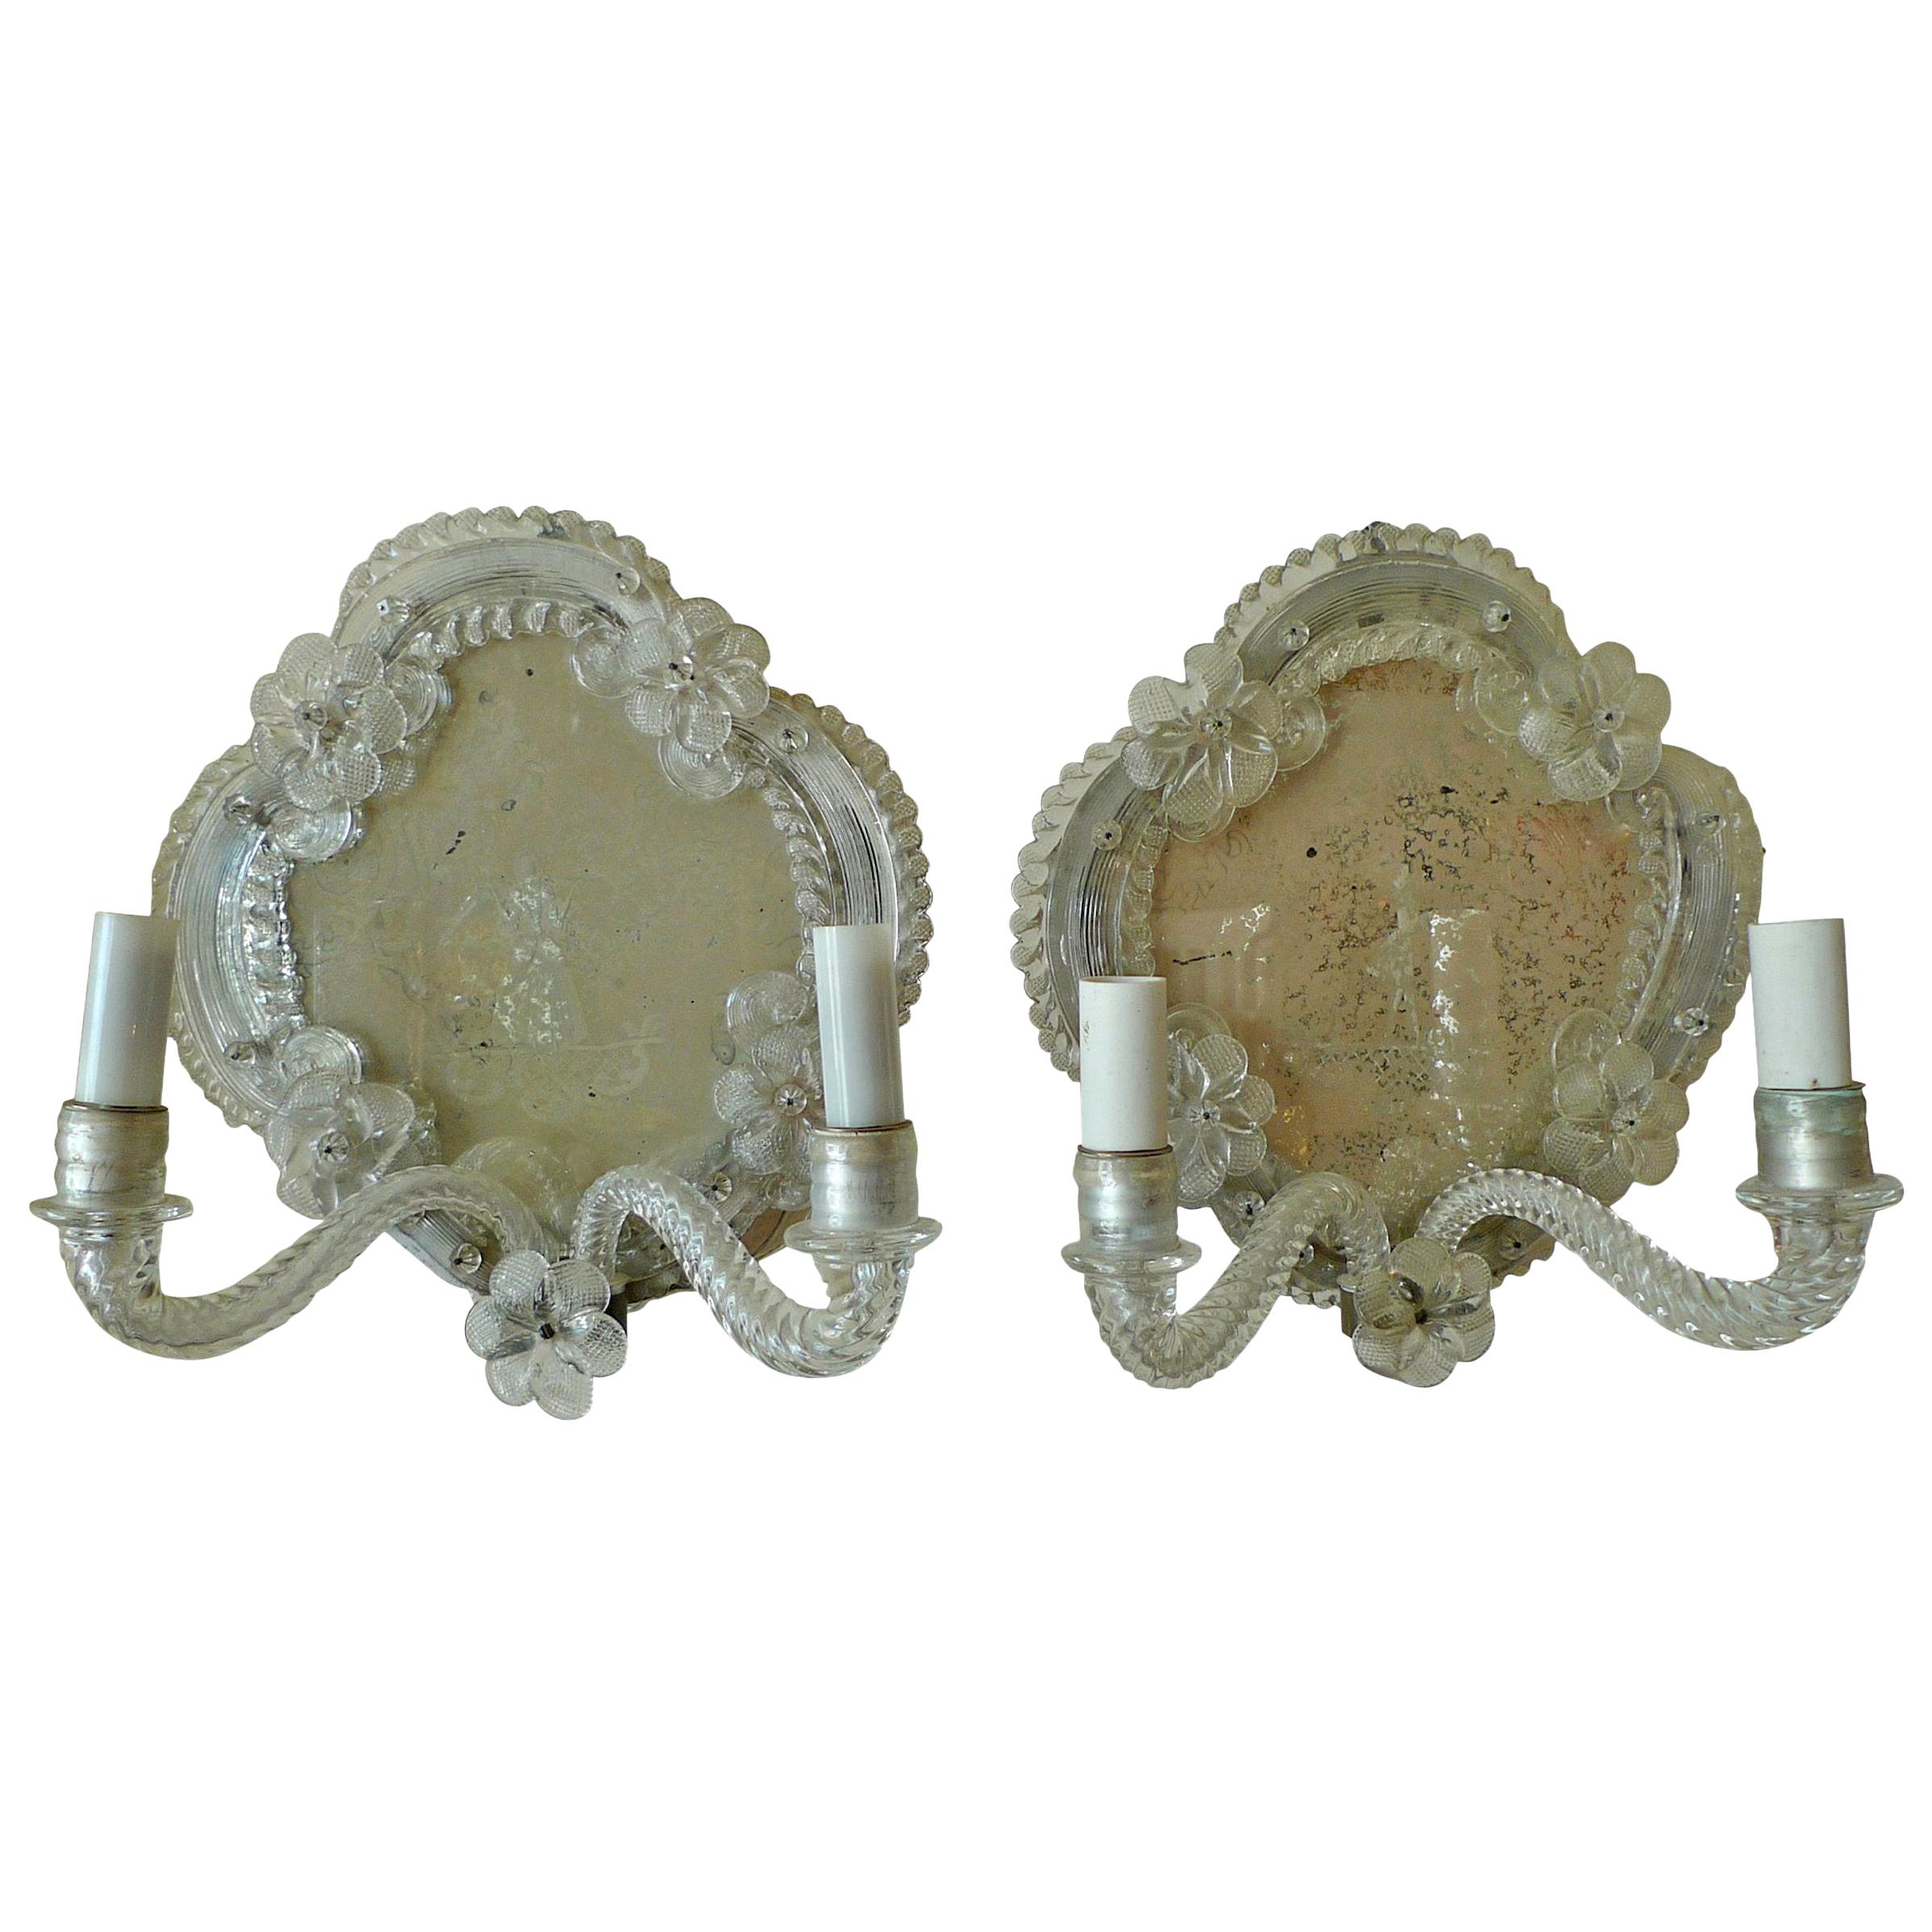 Pair of 19th Century Venetian Mirrored Sconces with Original Glass